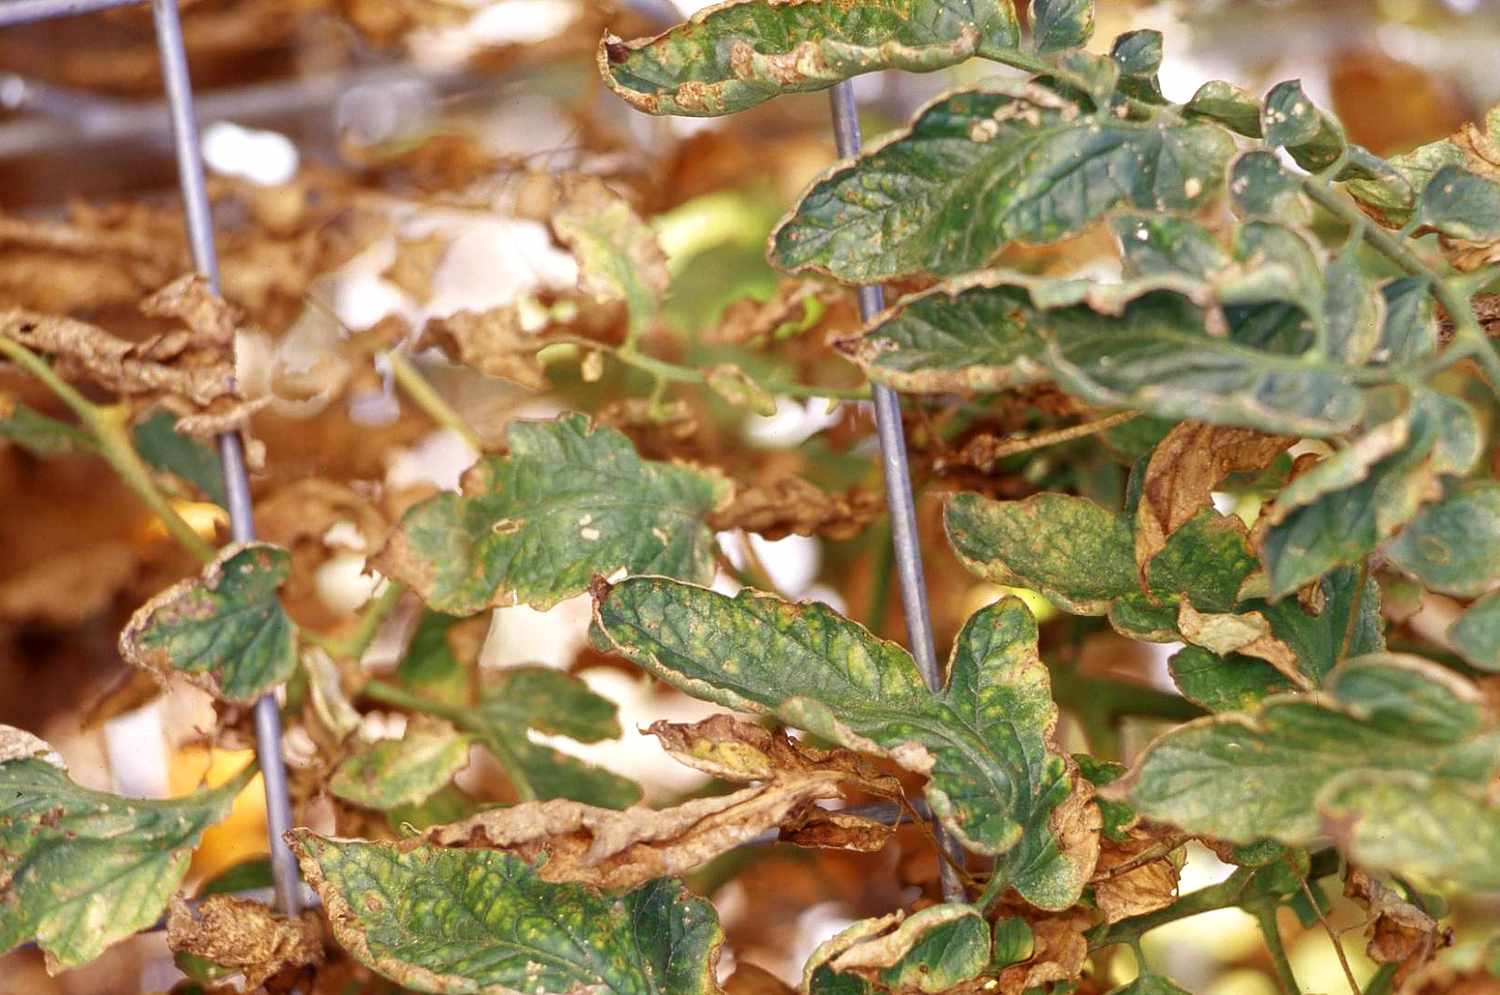 Tomato Plant Diseases Better Homes Gardens,Soft Shell Crab